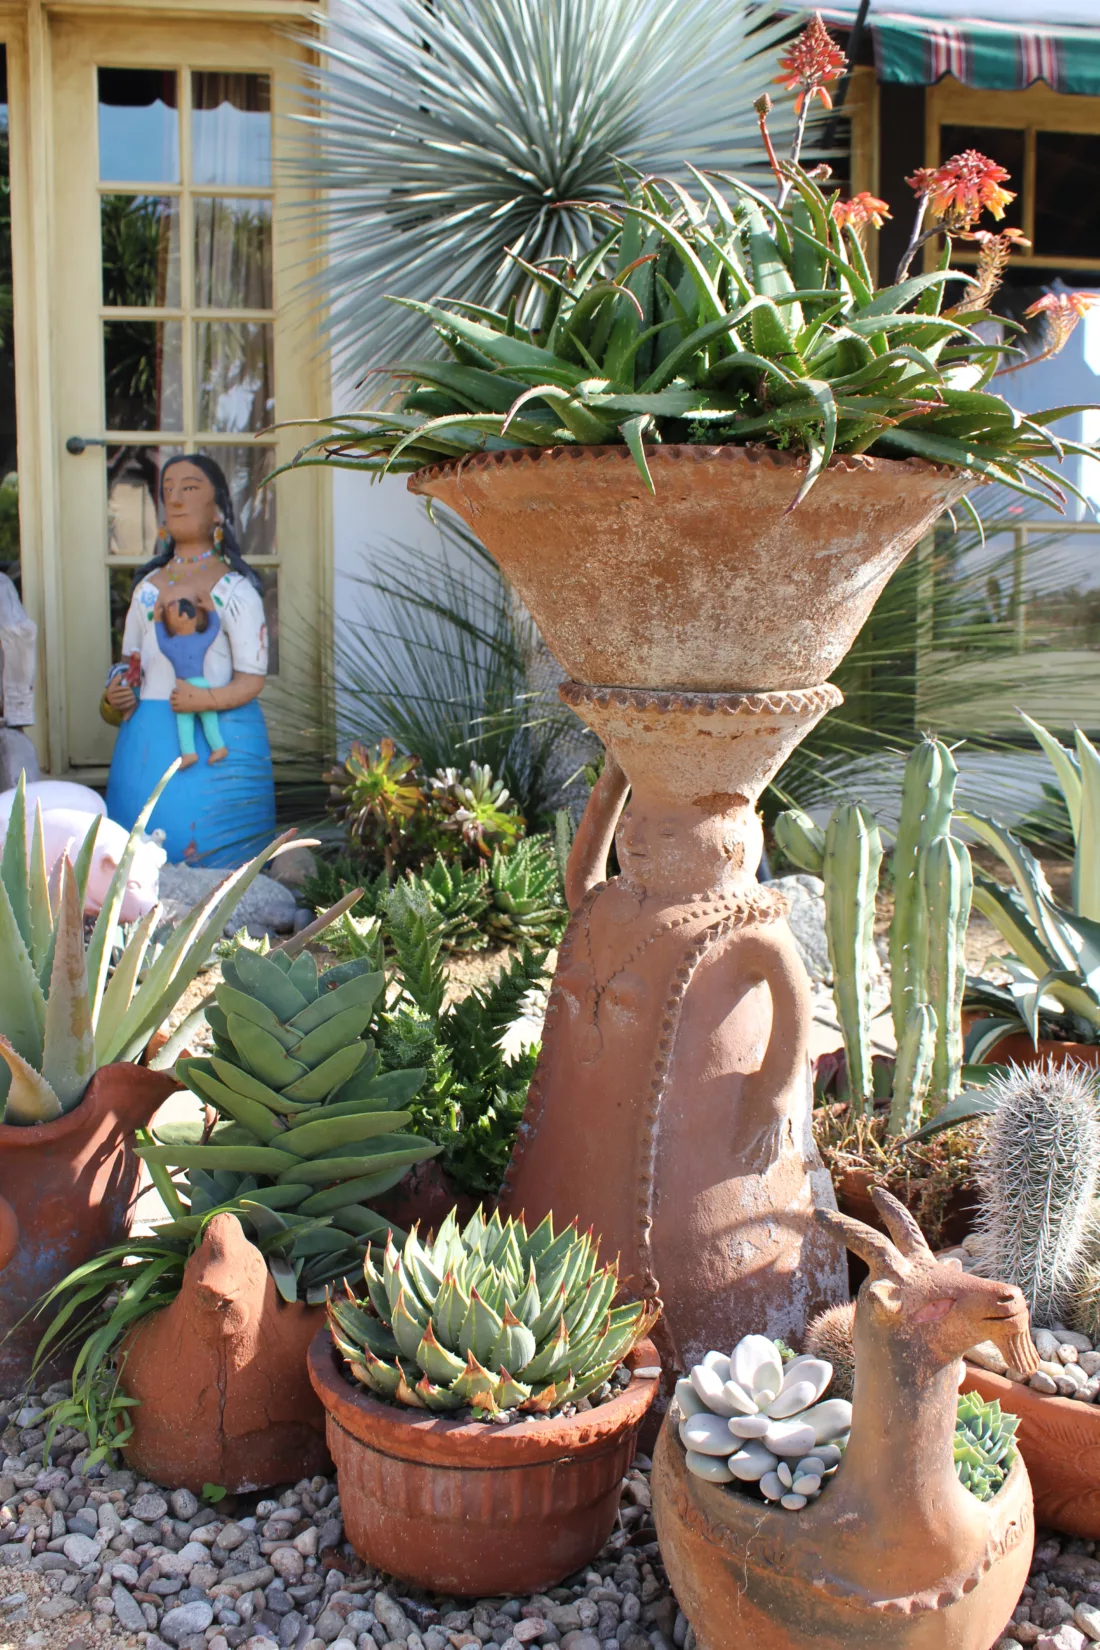 pottery and water-wise succulents and architectural plants in a xeric landscape